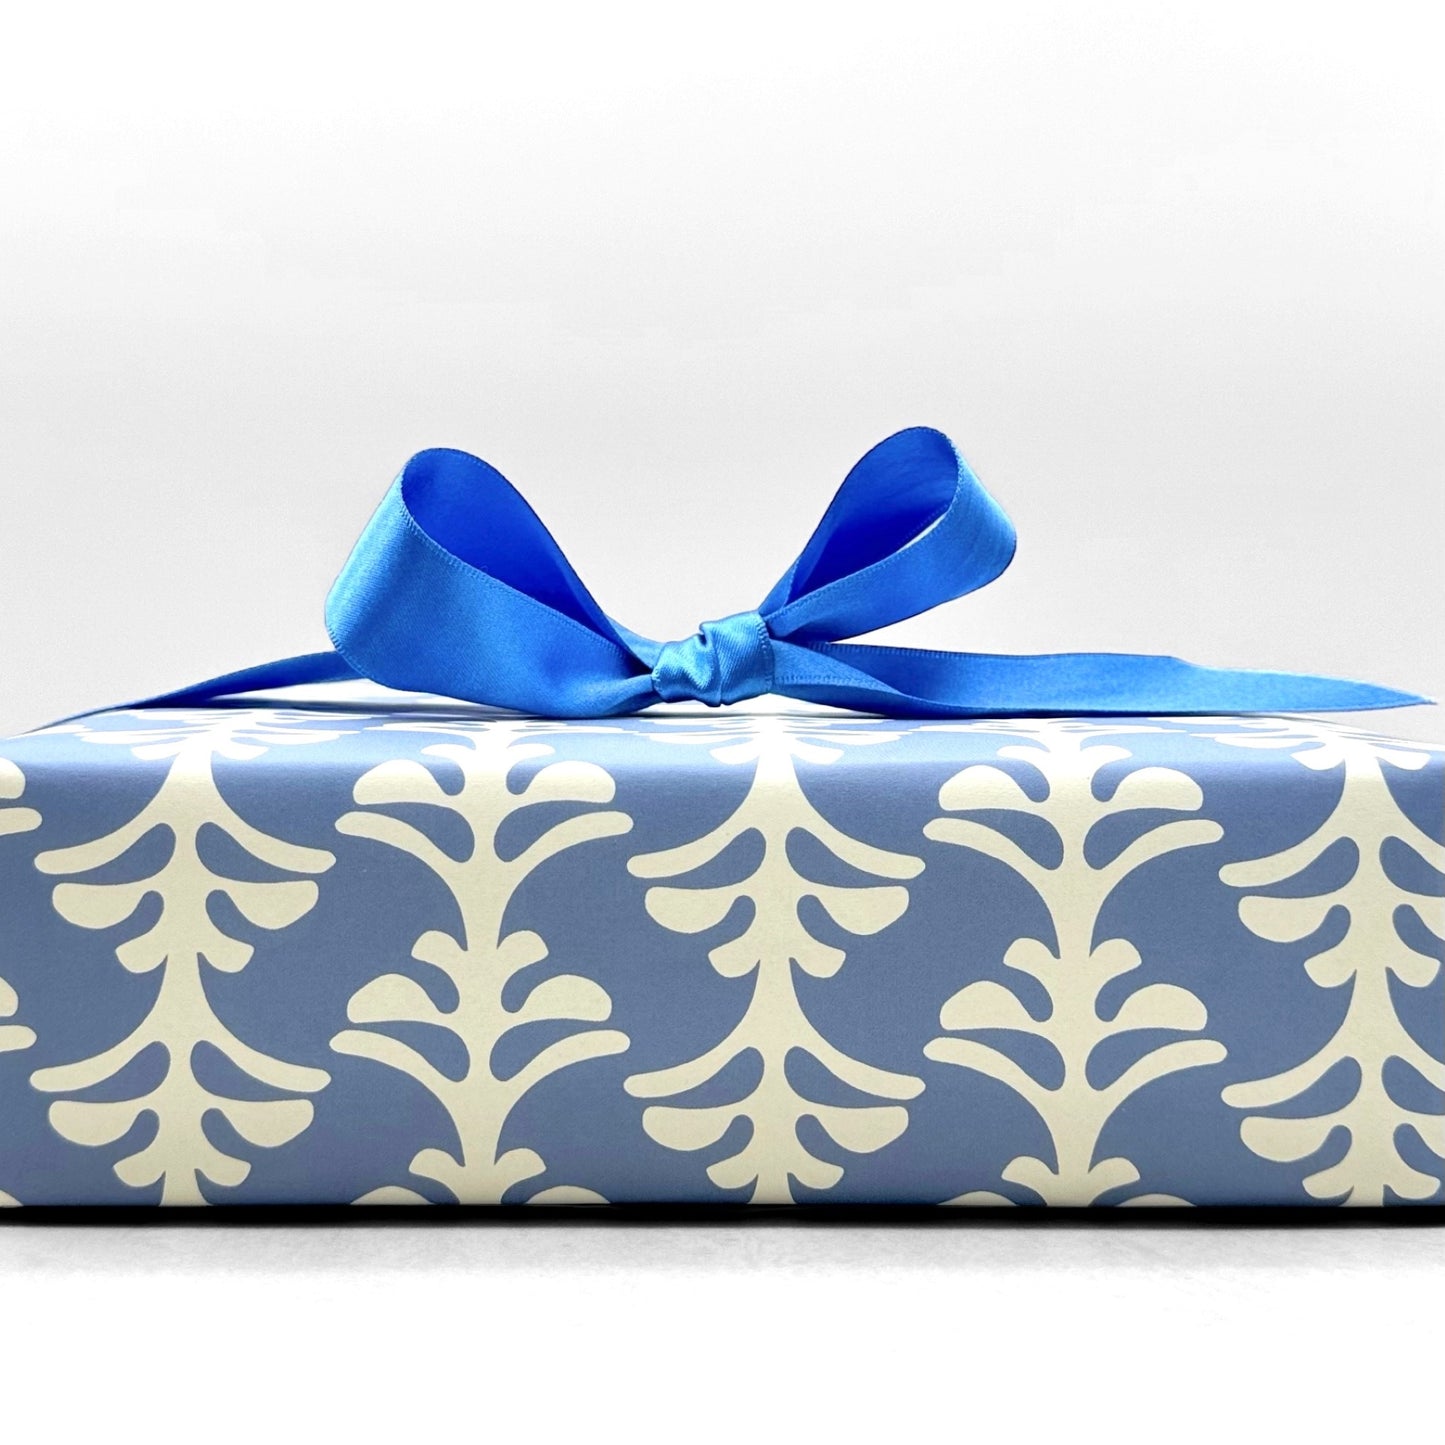 wrapping paper by Otto Editions with a cut-out palm design in white on a sky blue background. Pictured wrapped as a present with a blue ribbon